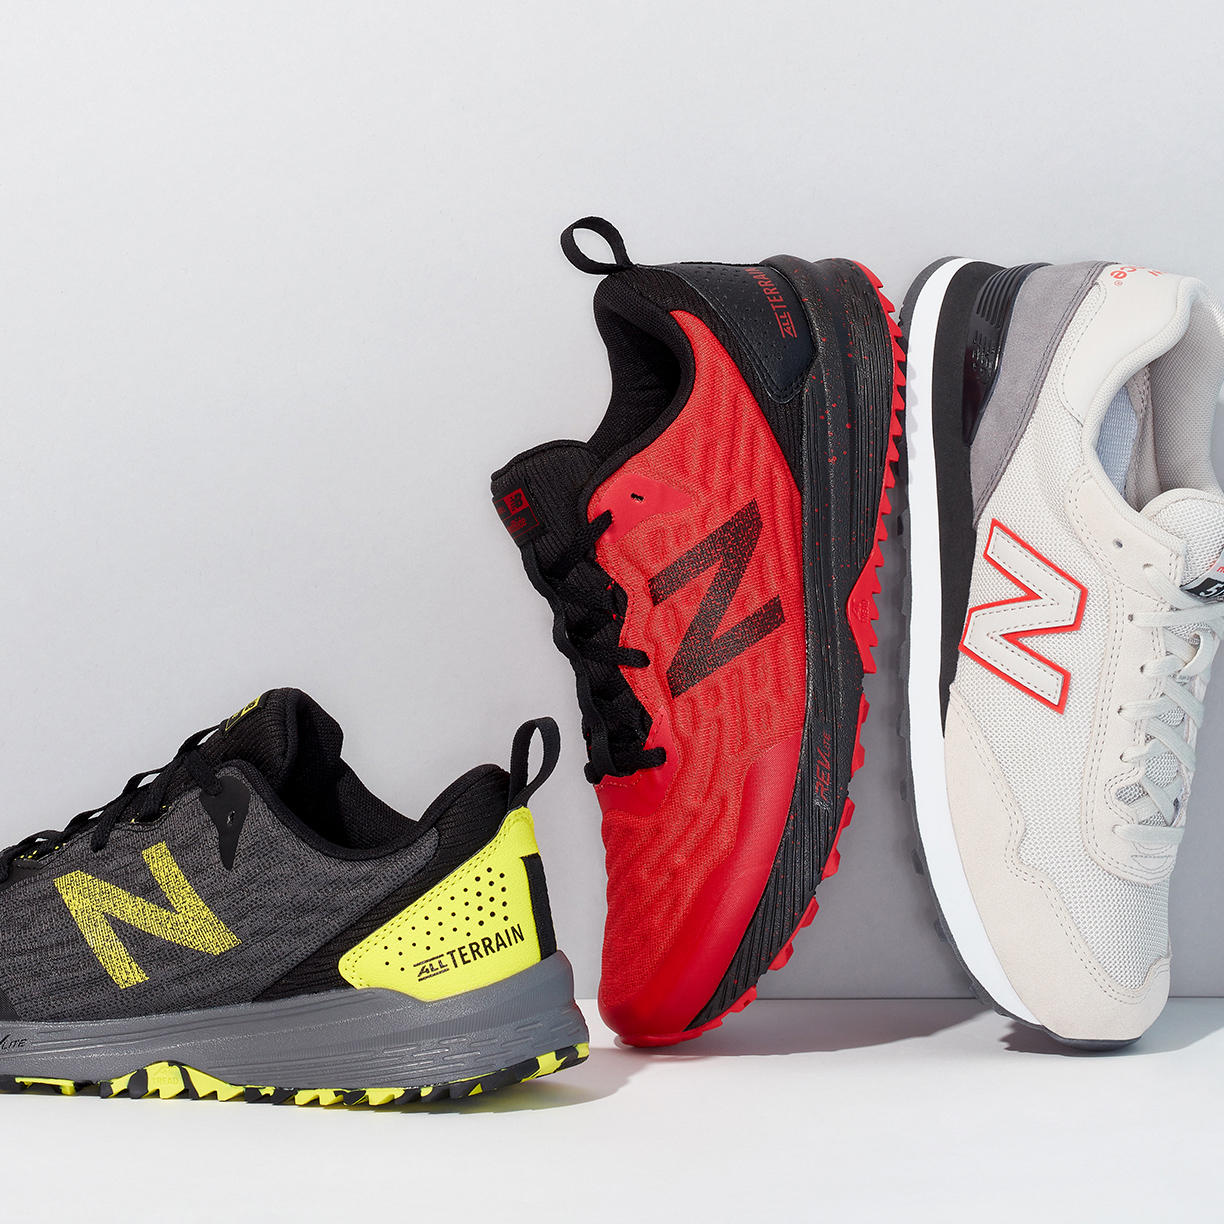 Men's Running & Active Shoes Feat. New Balance